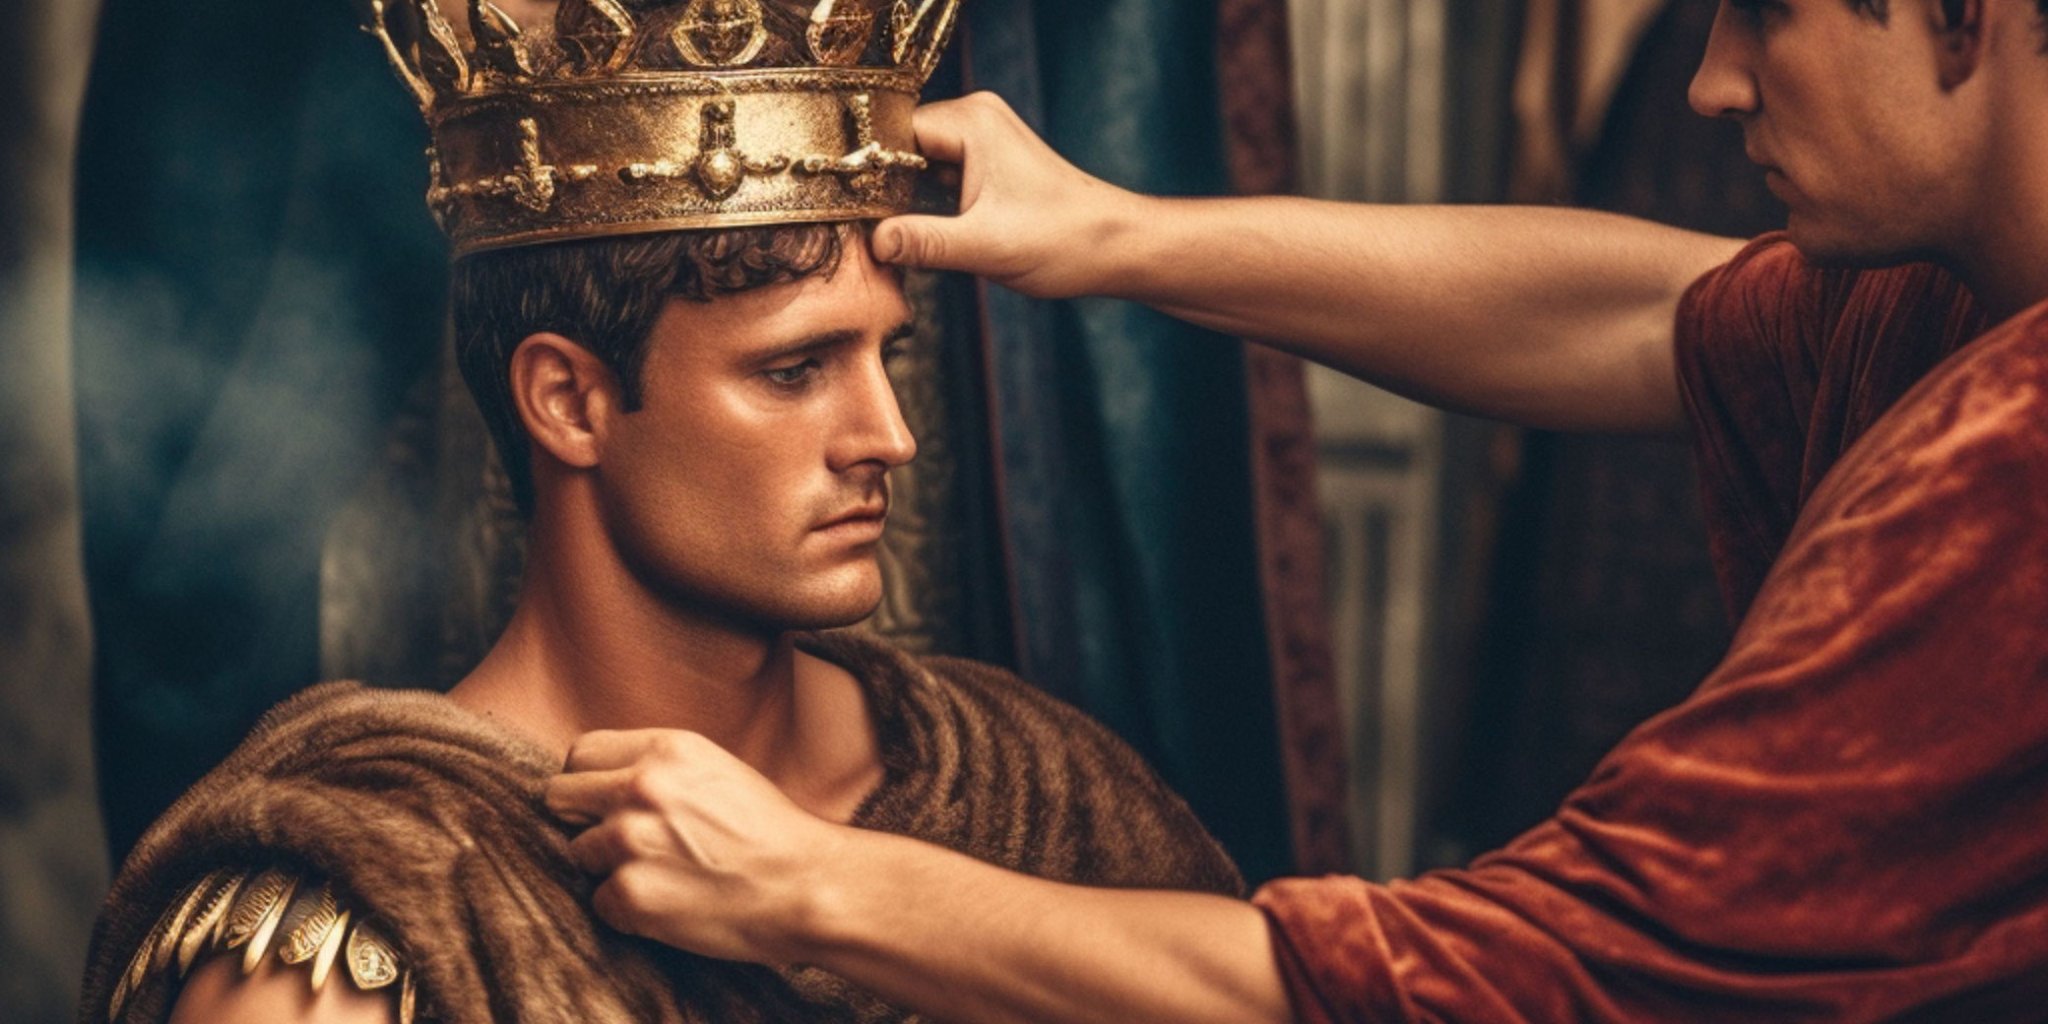 Why were Roman soldiers given crowns?